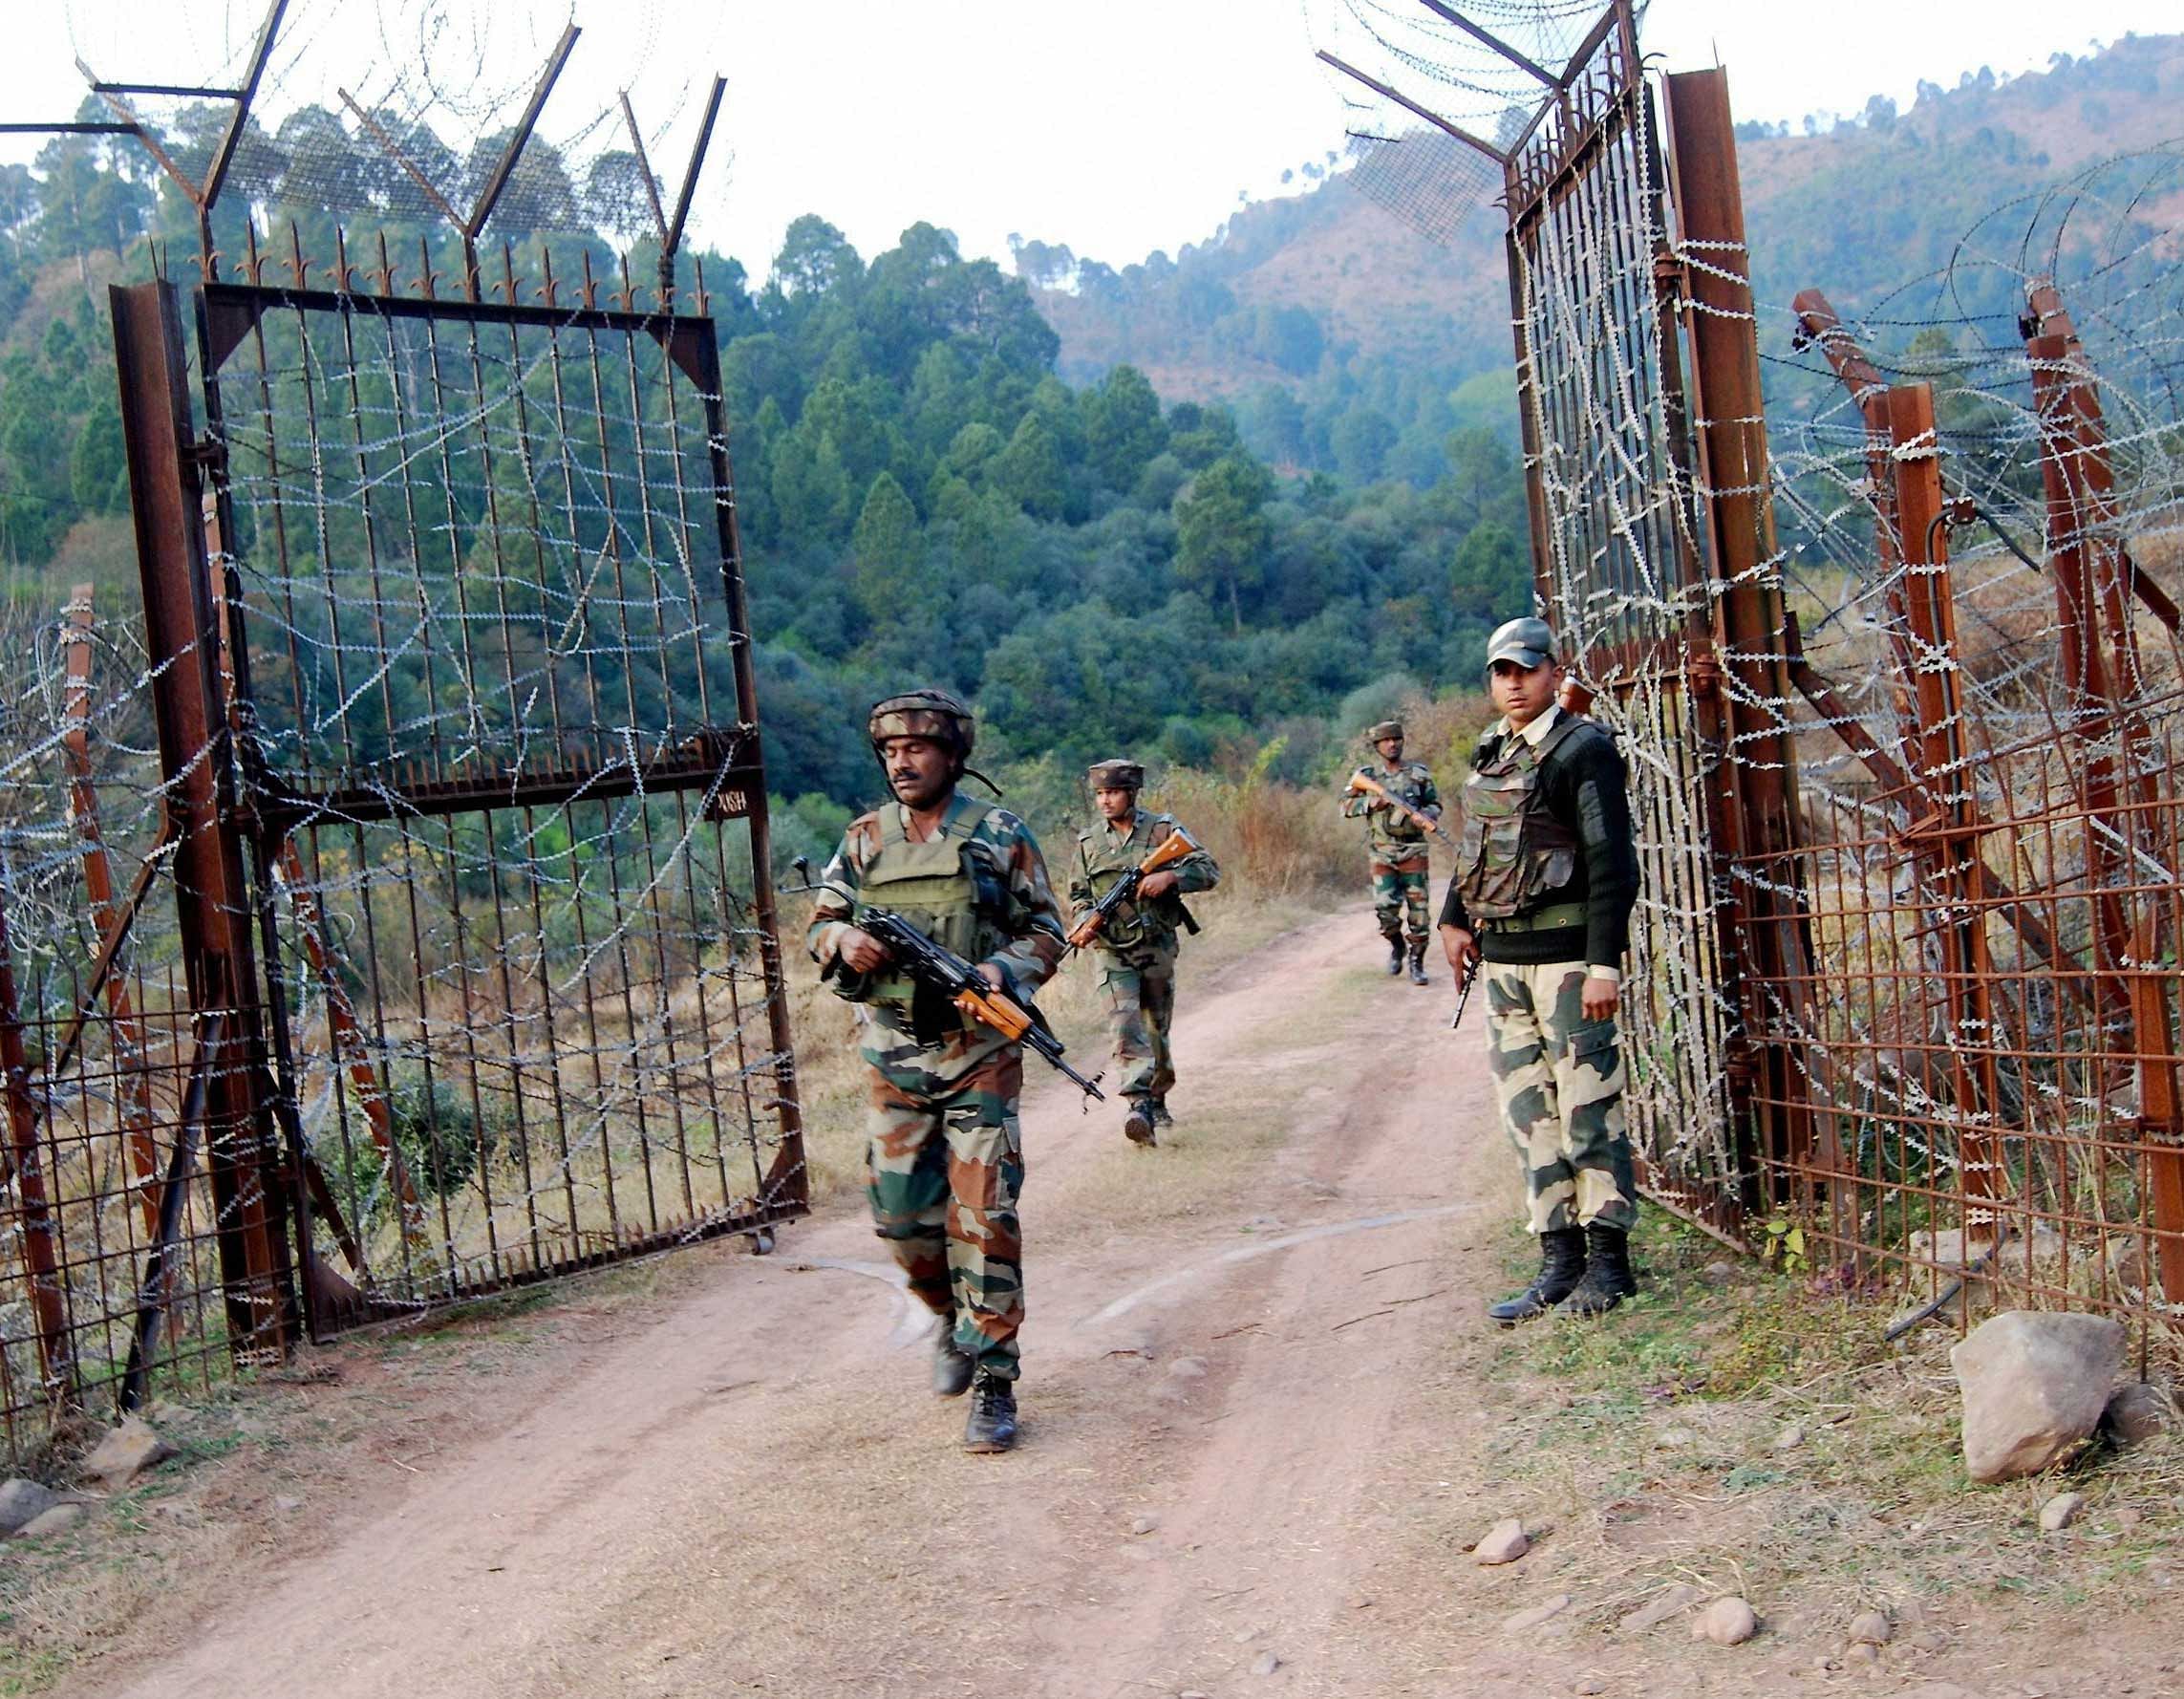 The BAT team carried out the attack from Poonch at 600 metres inside Indian territory, but were succesfully repelled. Photo credit: PTI.